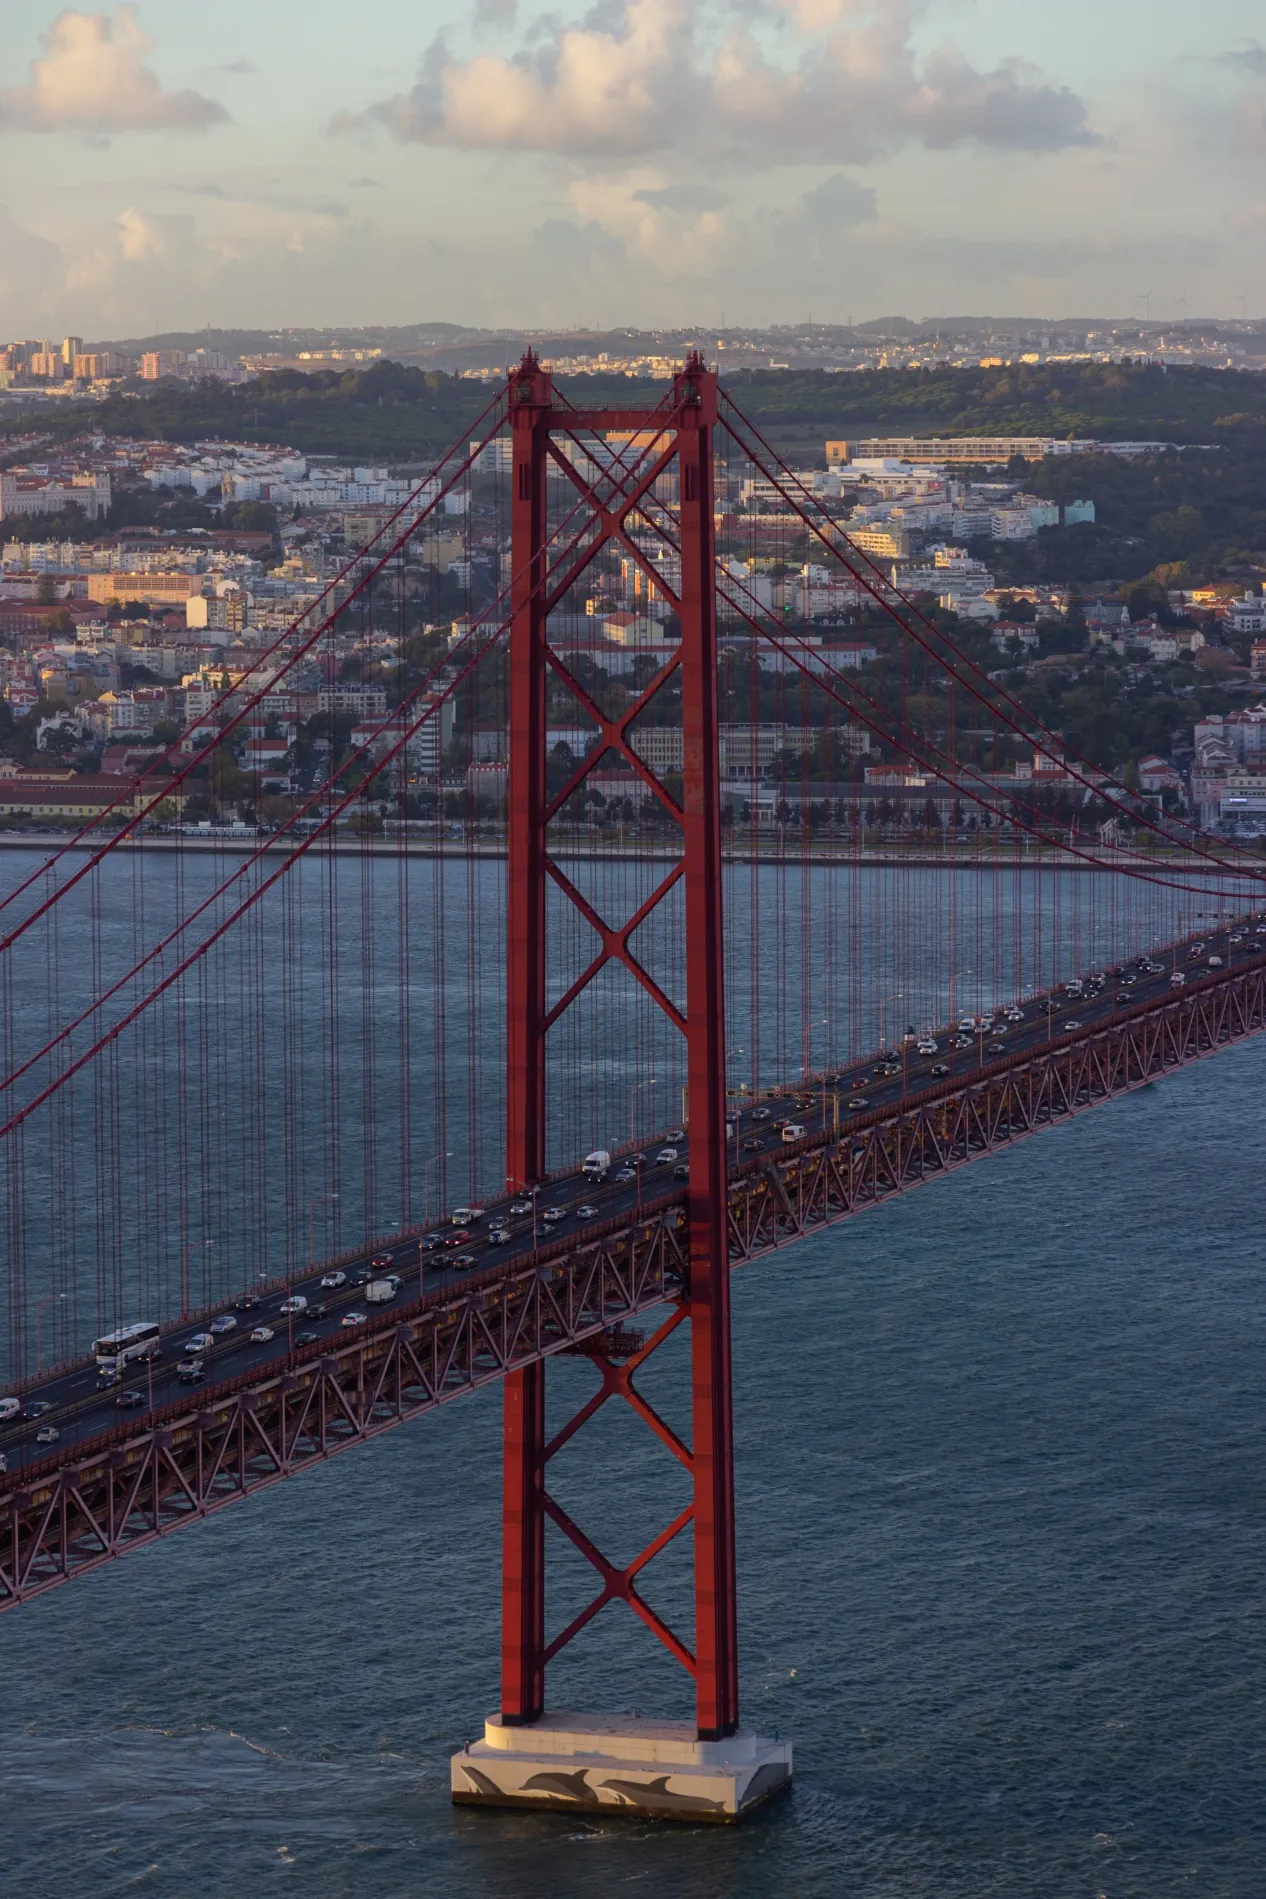 The new taxation of crypto in the 2023 Portuguese state budget